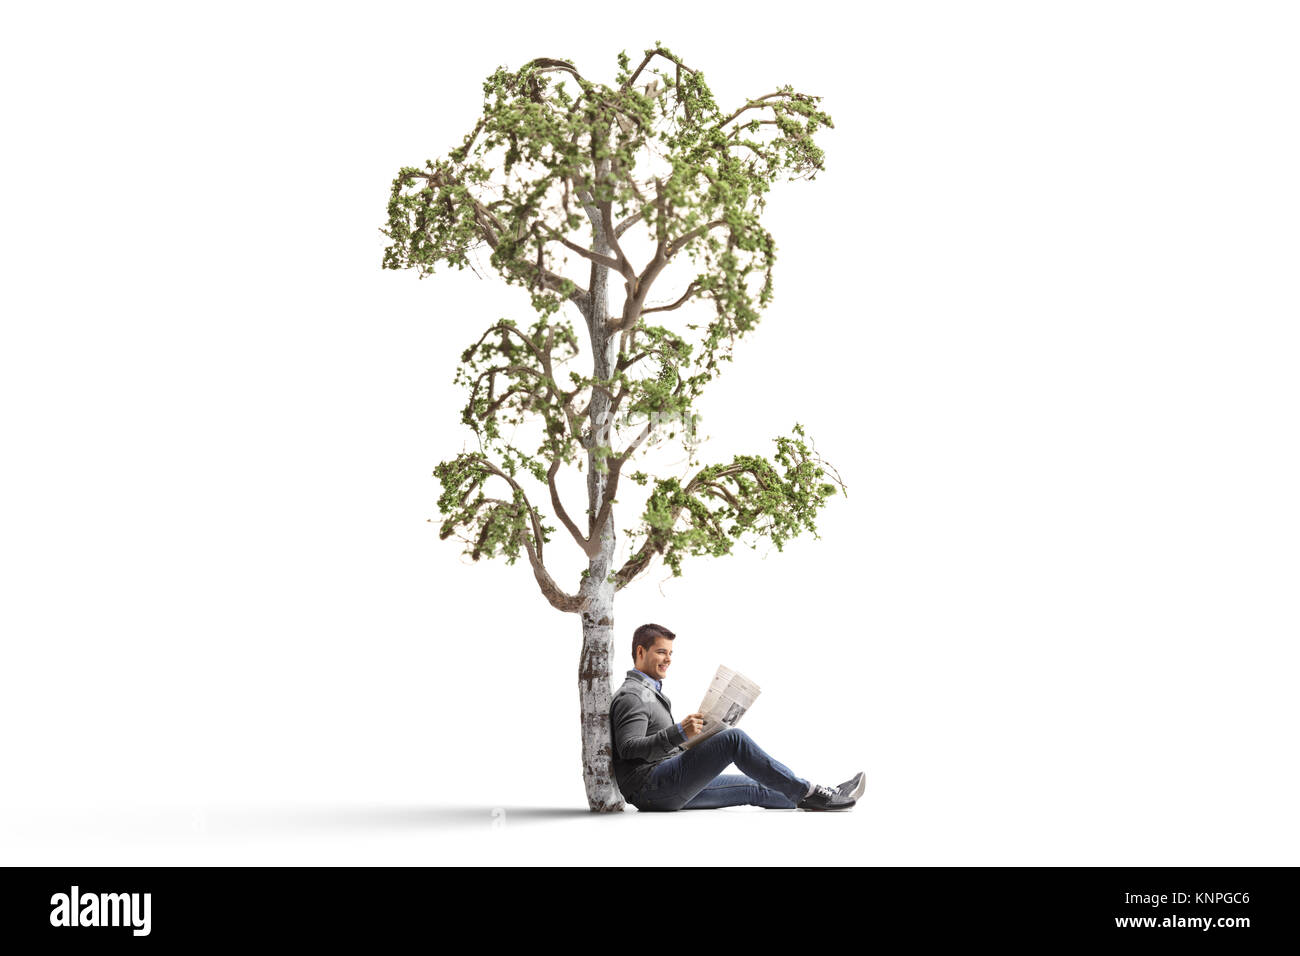 Young man reading a newspaper under a birch tree isolated on white background Stock Photo